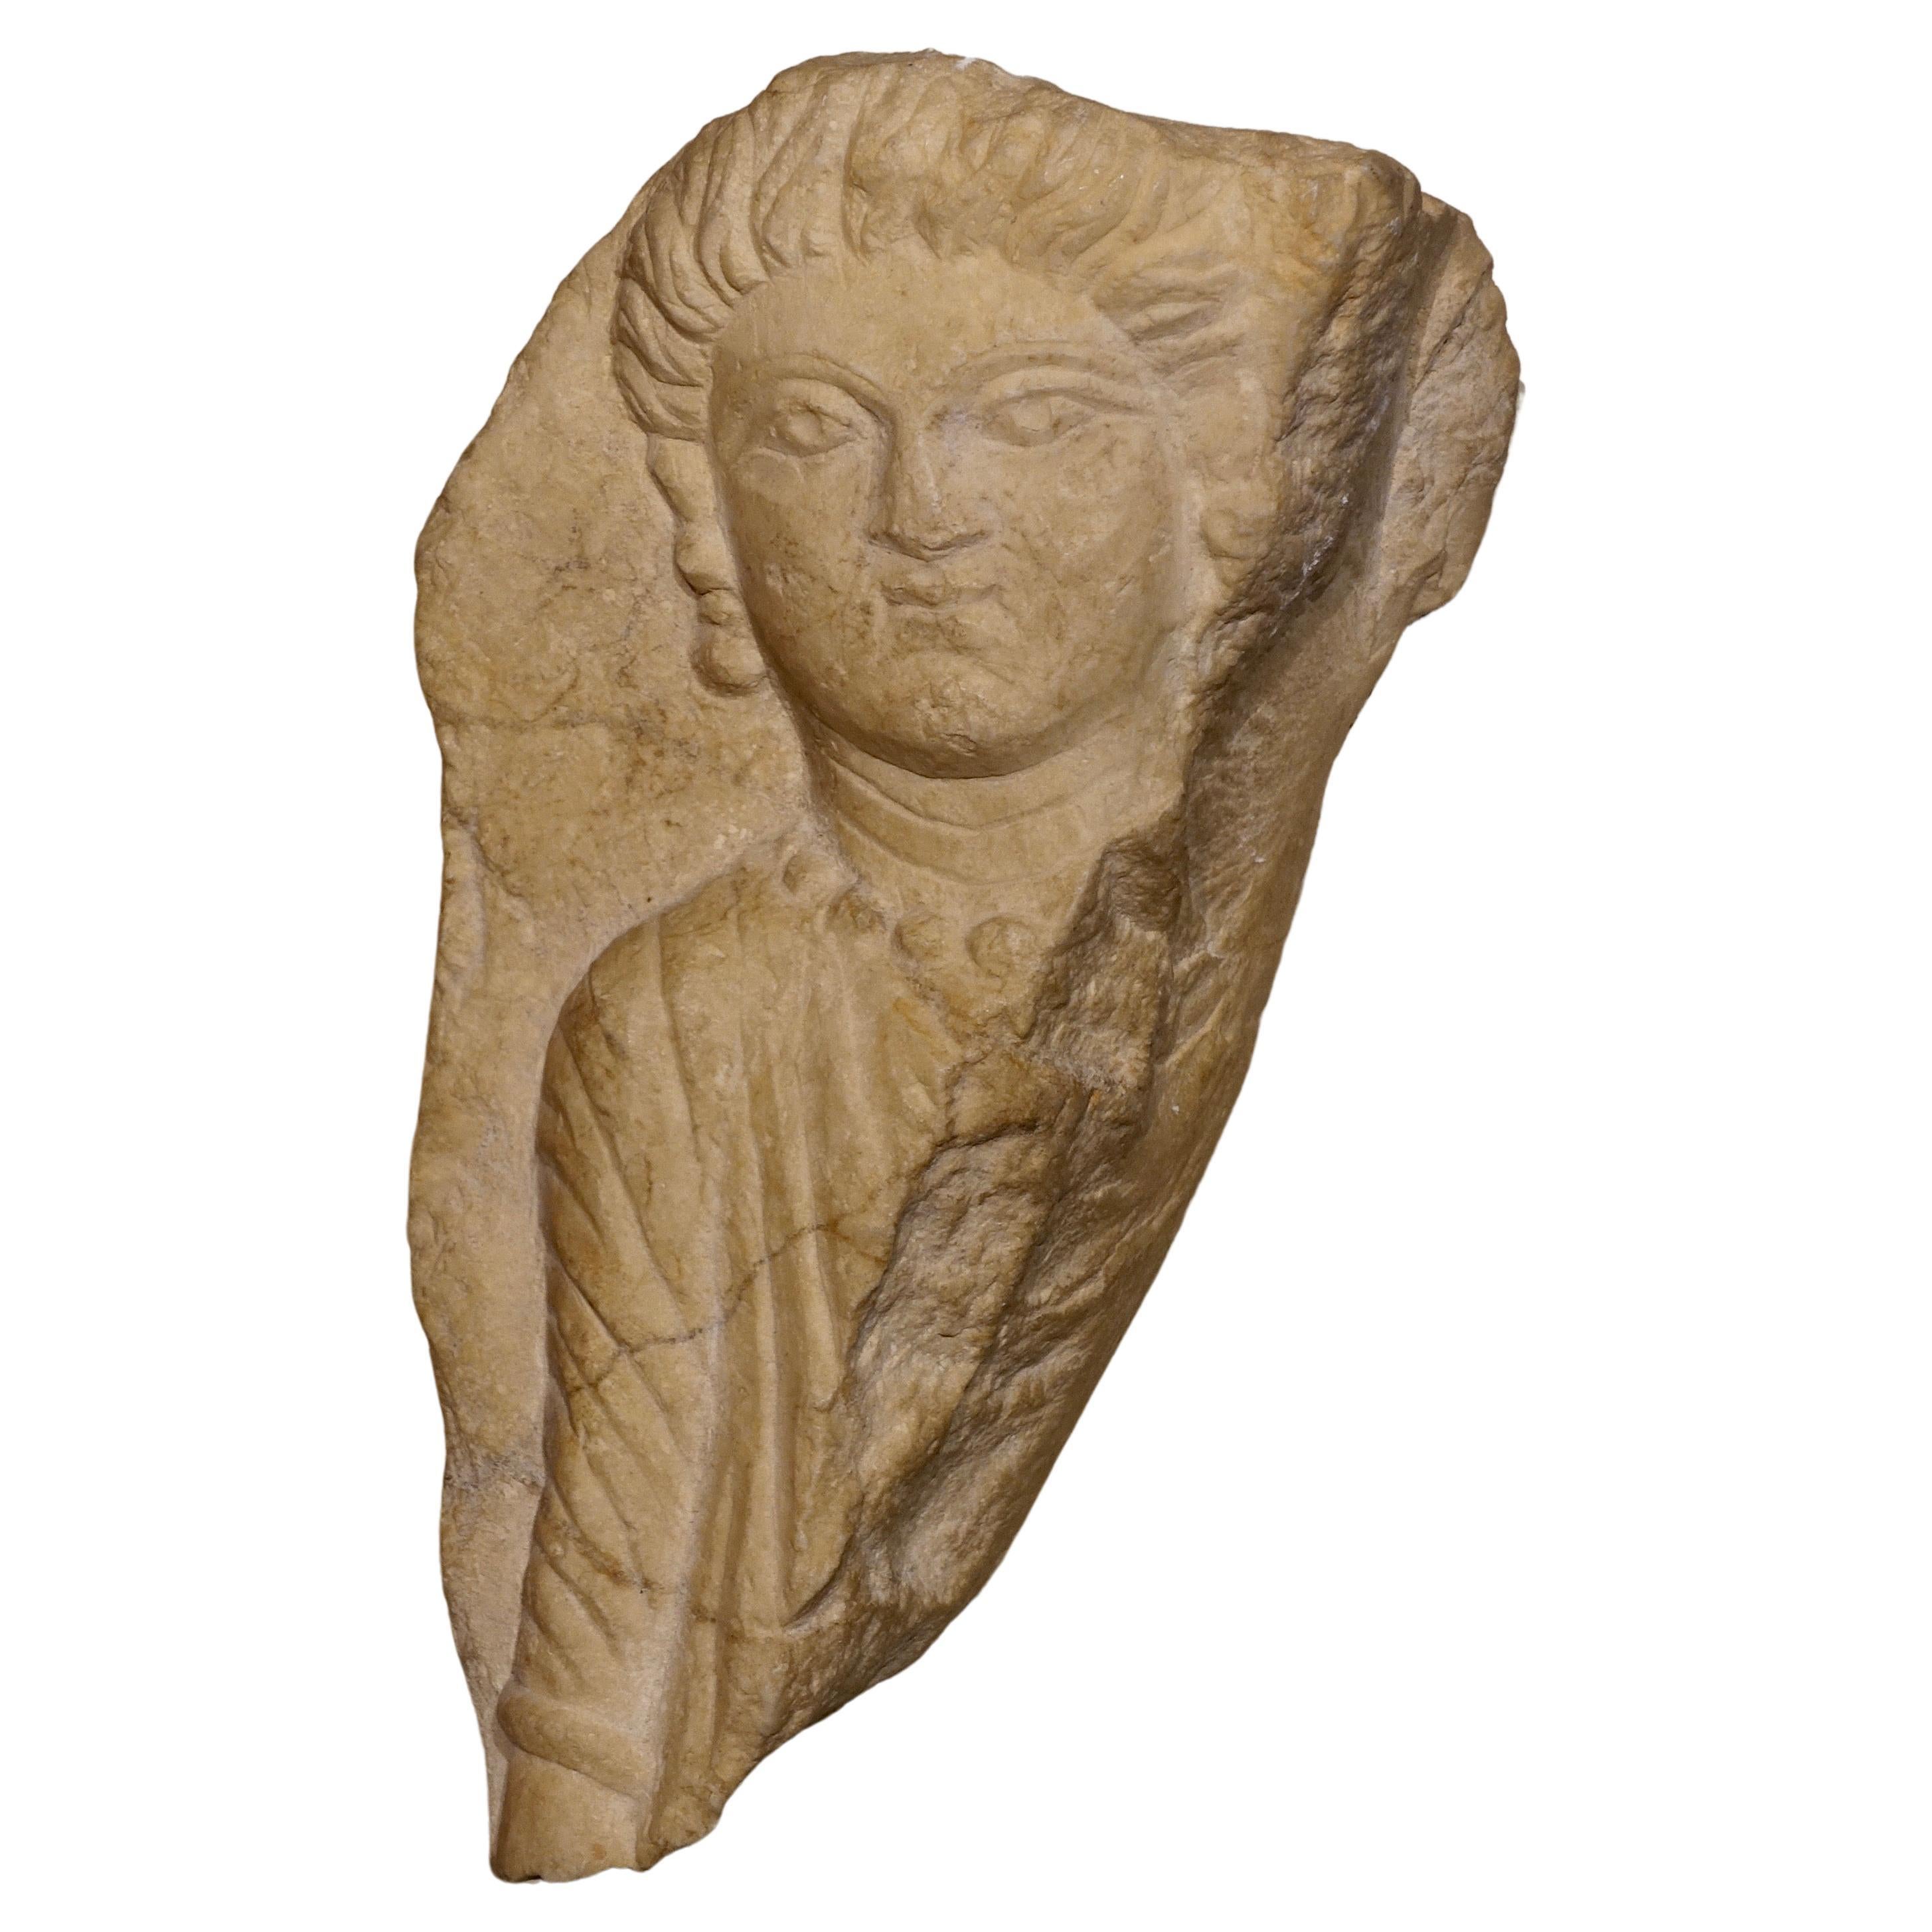 Low Relief of a Young Woman, Palmyra, 3rd Century